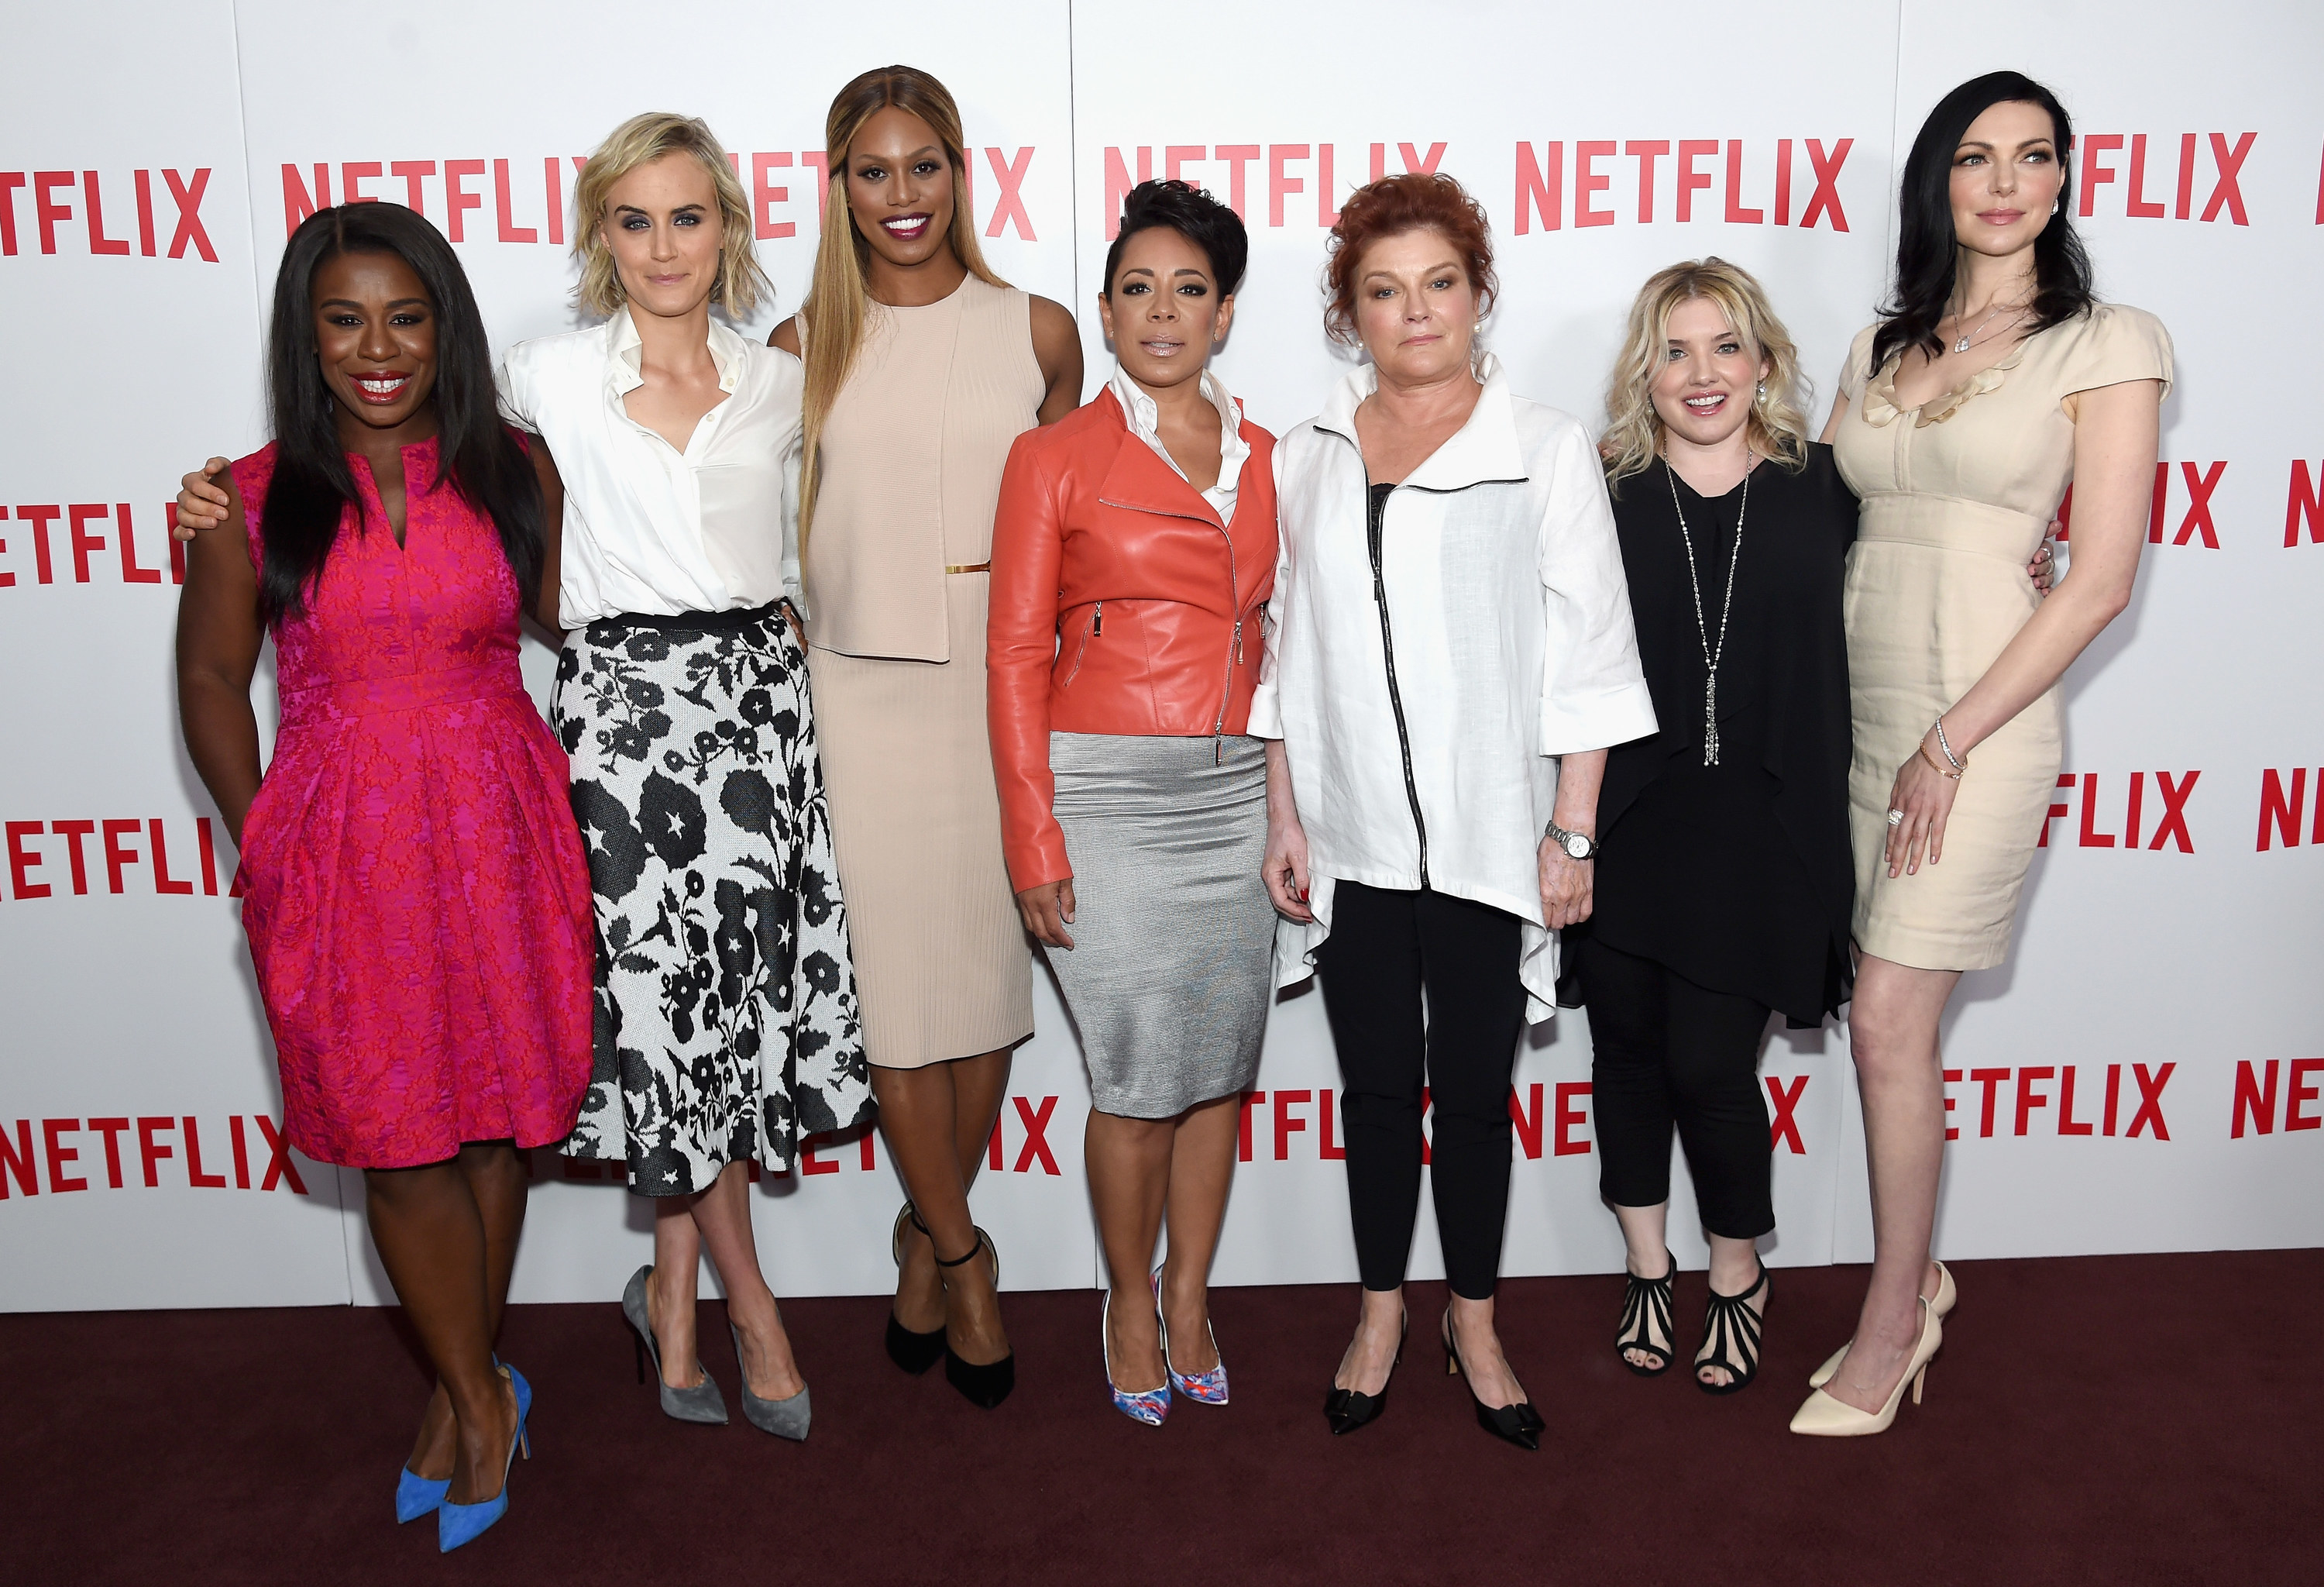 Members of the cast of Orange Is the New Black on the red carpet